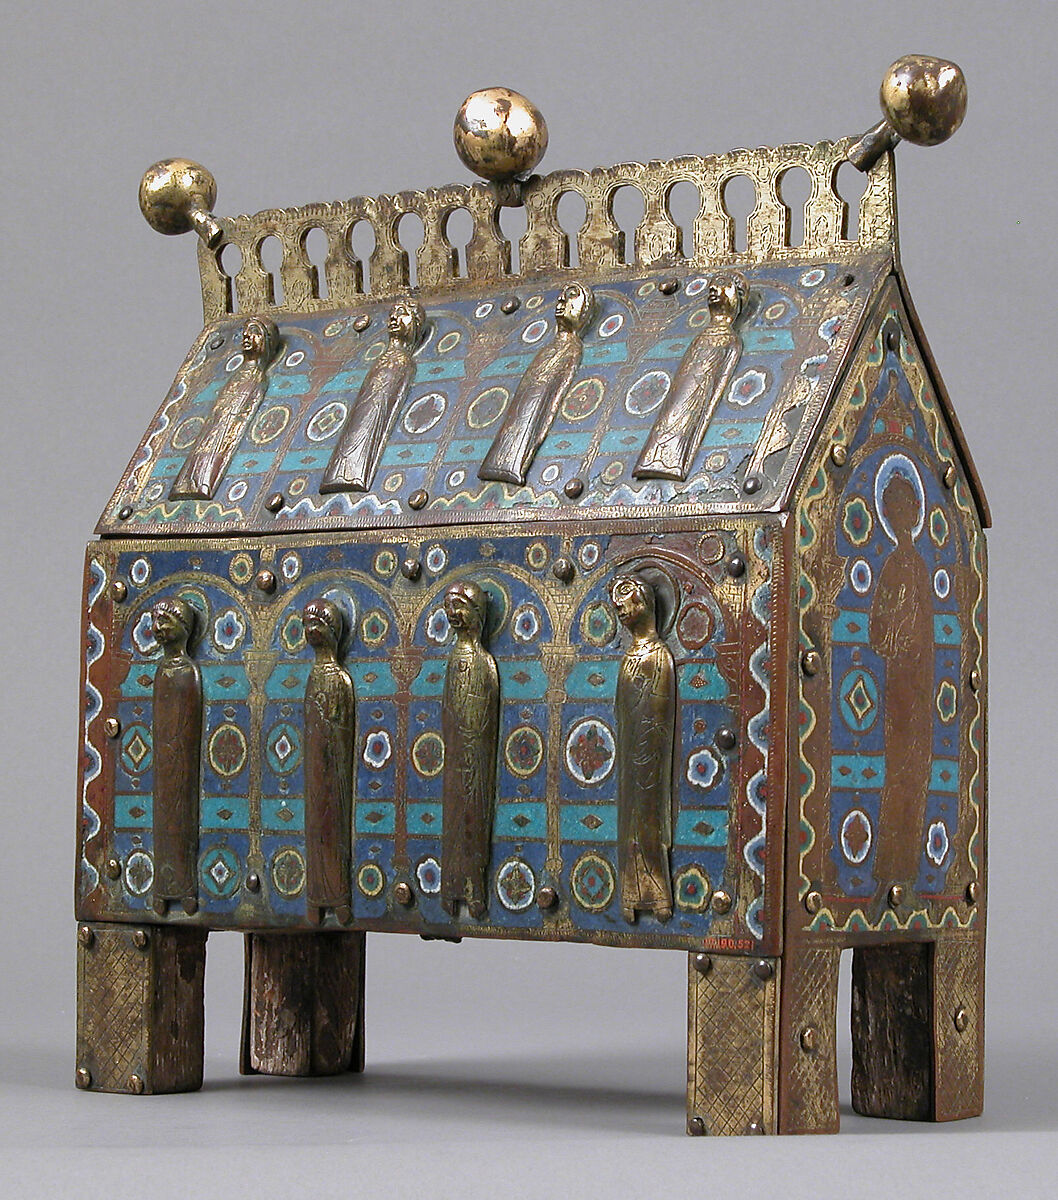 Chasse, Copper-gilt and champlevé enamel. Front: eight repoussé figures applied and gilt; each end: figure chased and gilt; black: blue ground, intersecting turquoise bands, fleurons in bright colors; crest and feet chased and gilt., French 